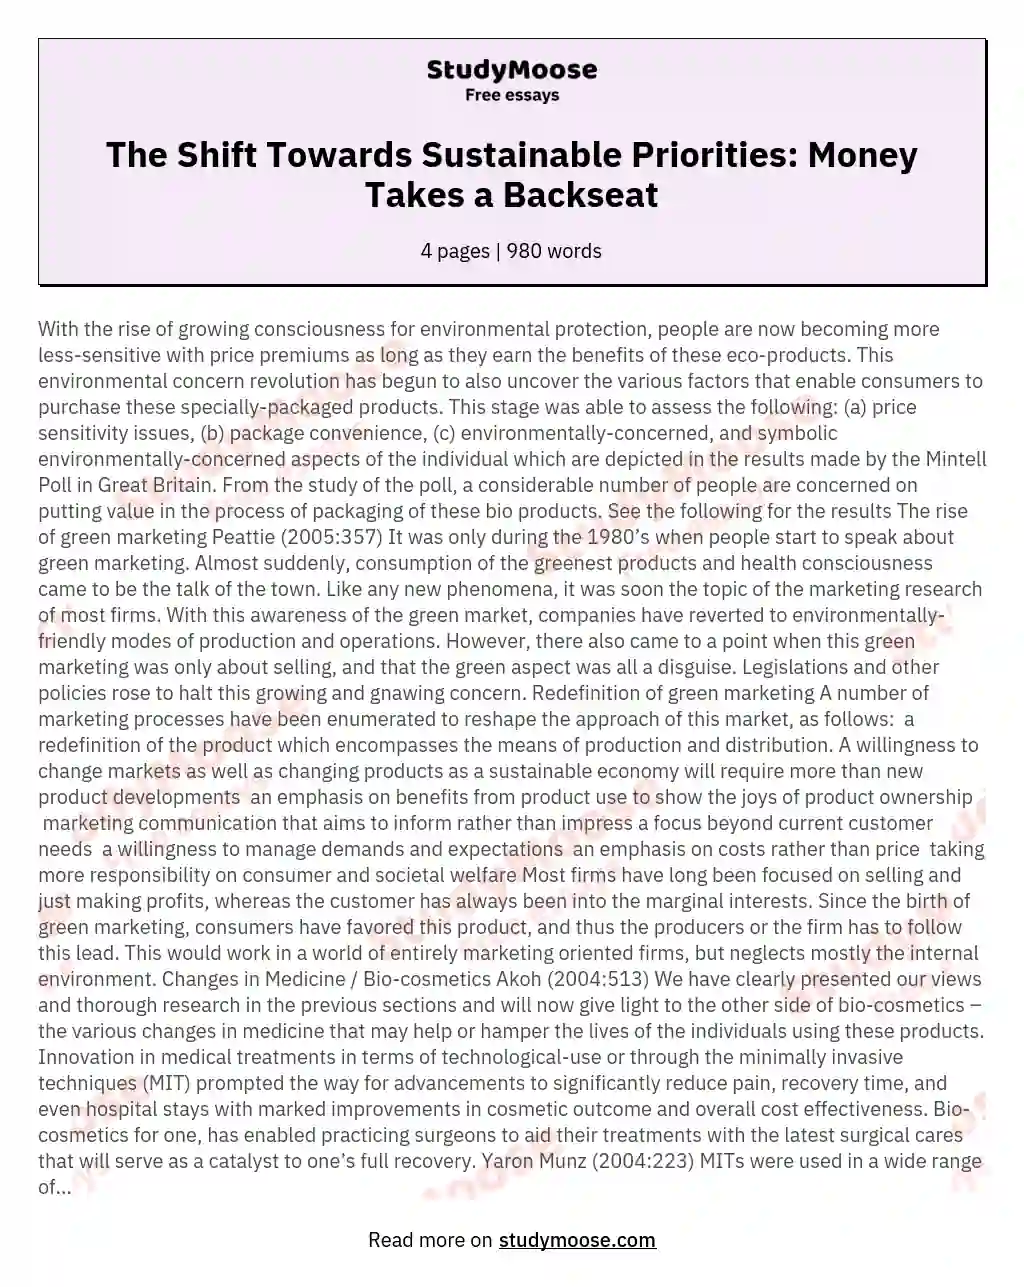 The Shift Towards Sustainable Priorities: Money Takes a Backseat essay